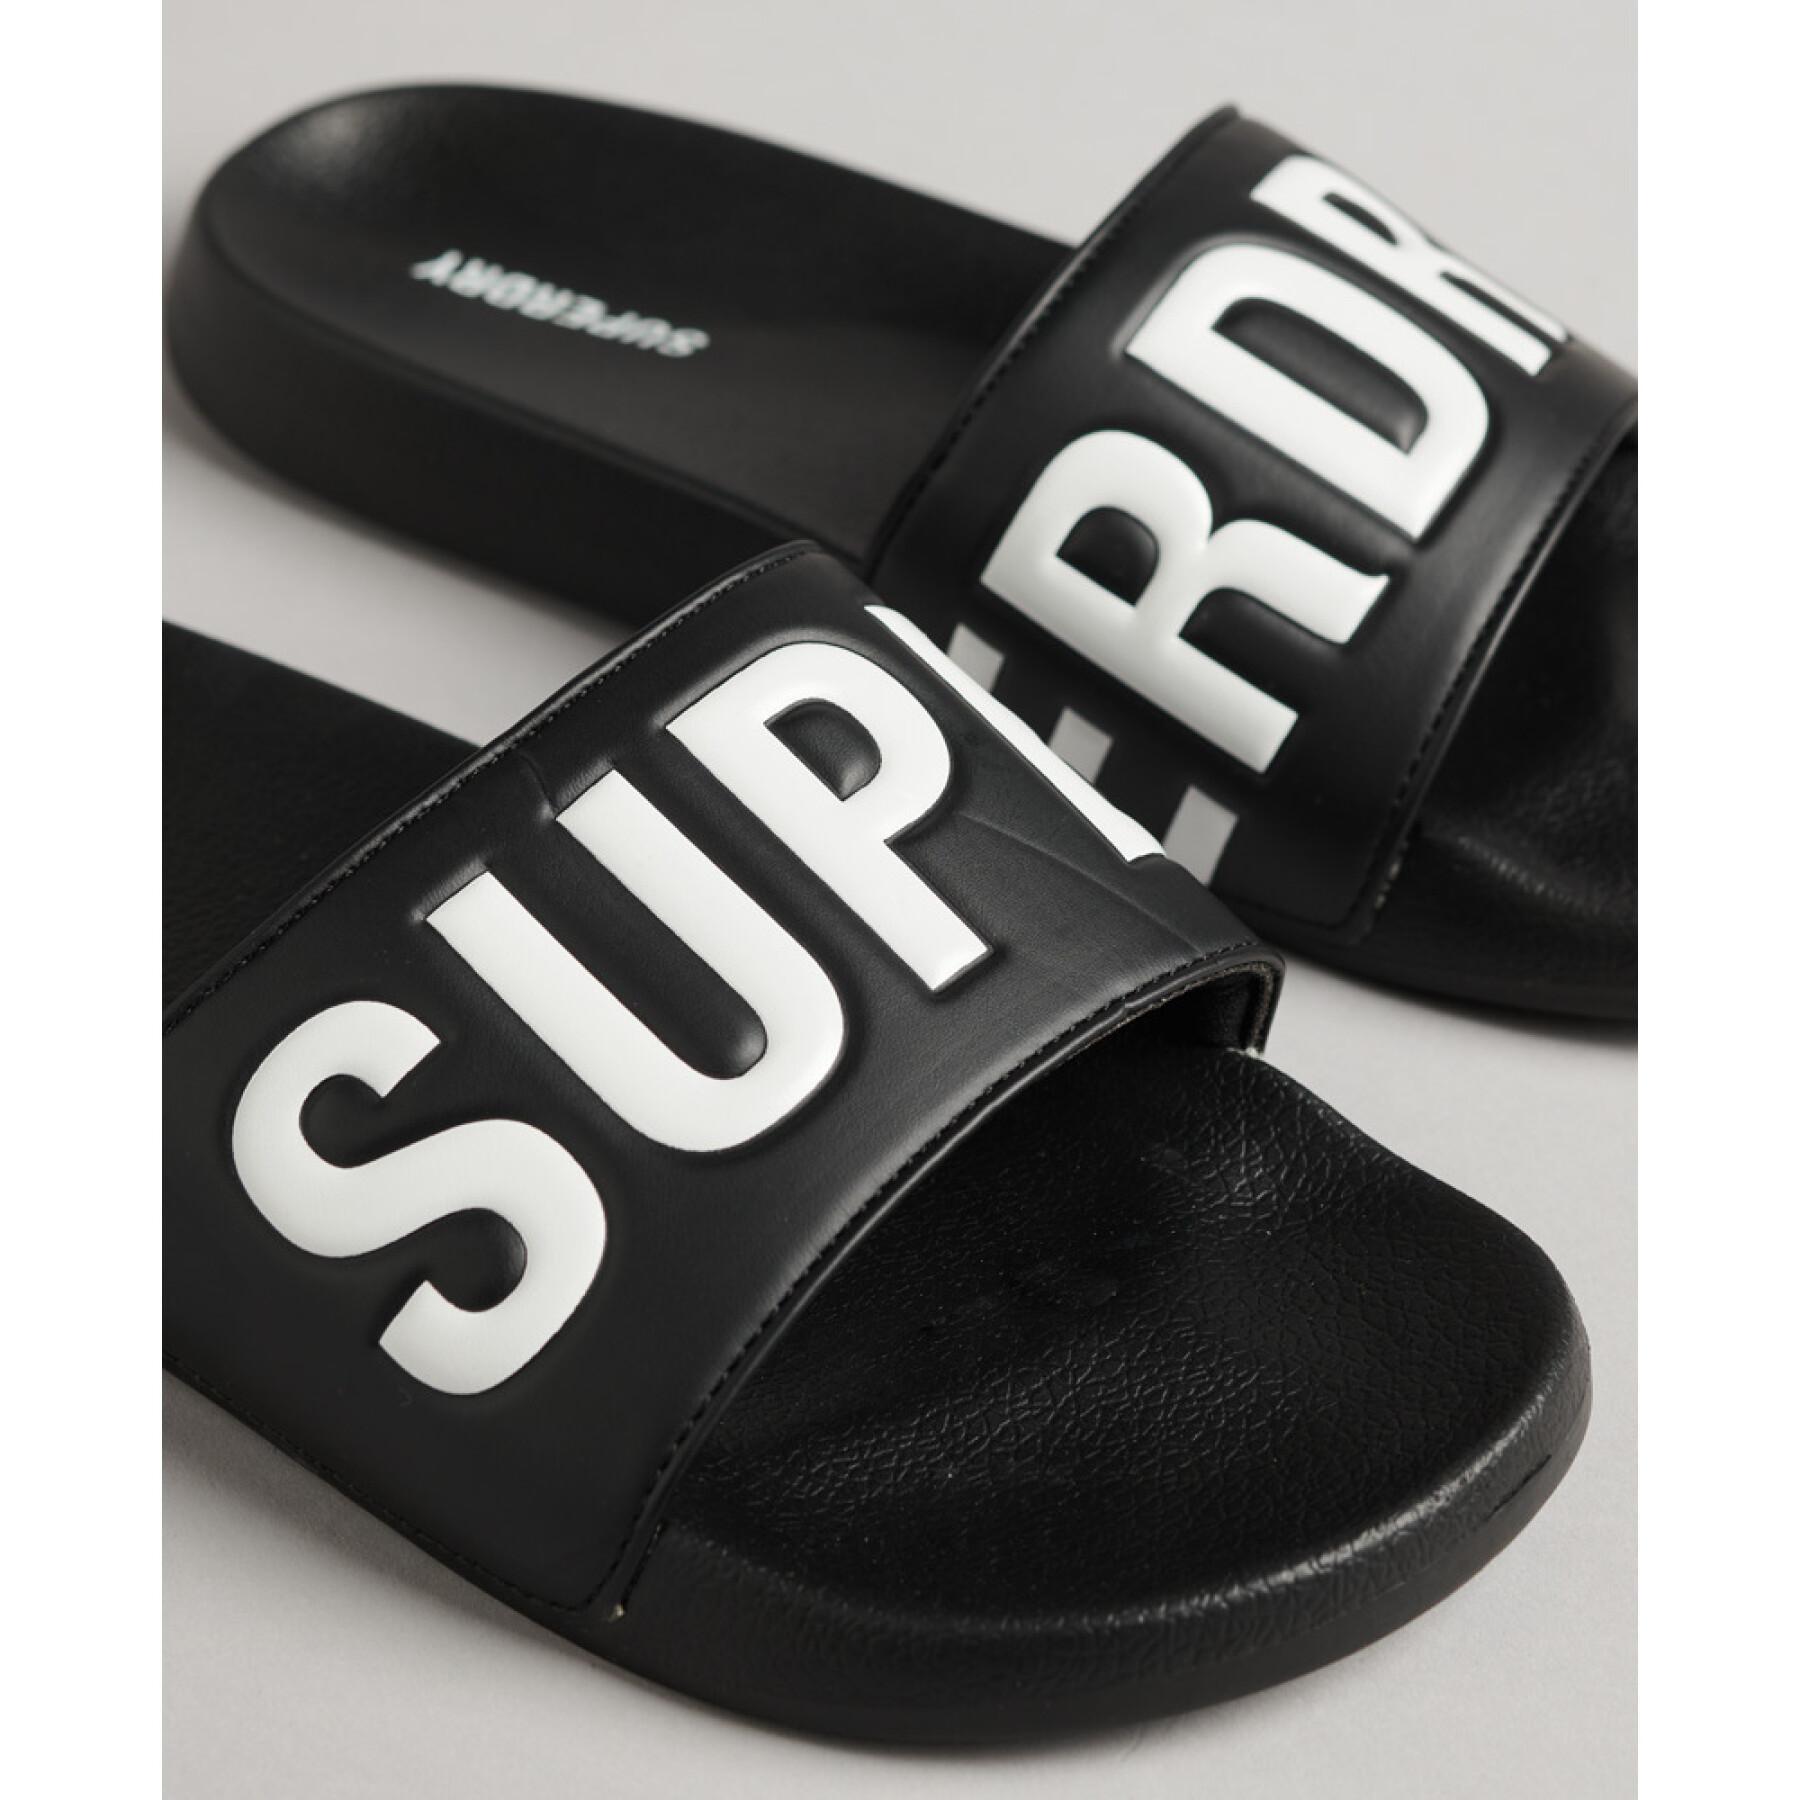 Tap shoes Superdry Code Core